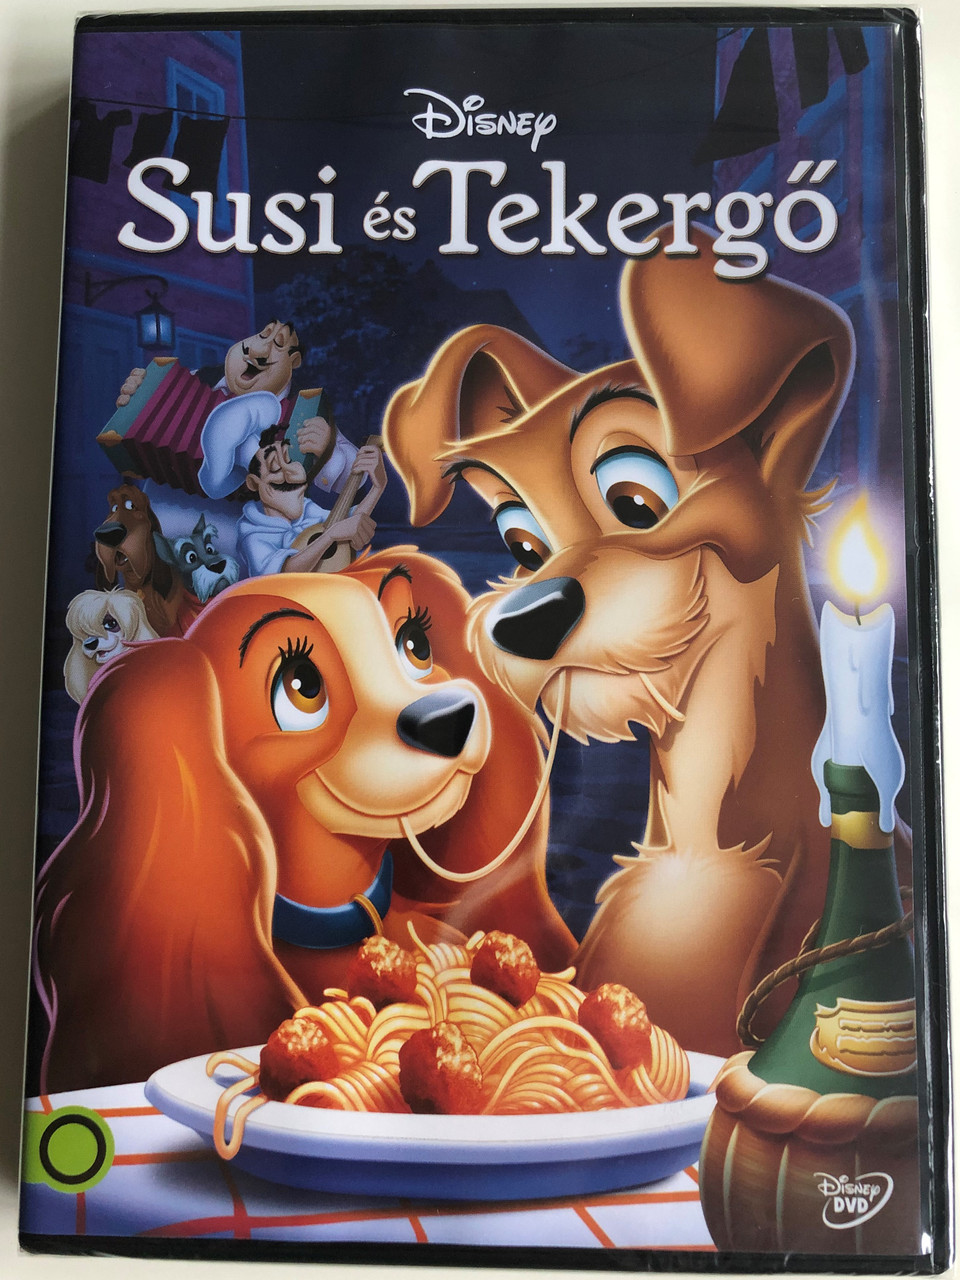 Lady and the Tramp (Susi és Tekergő) DVD 1955 / Directed by Clyde Geronimi,  Wilfred Jackson, Hamilton